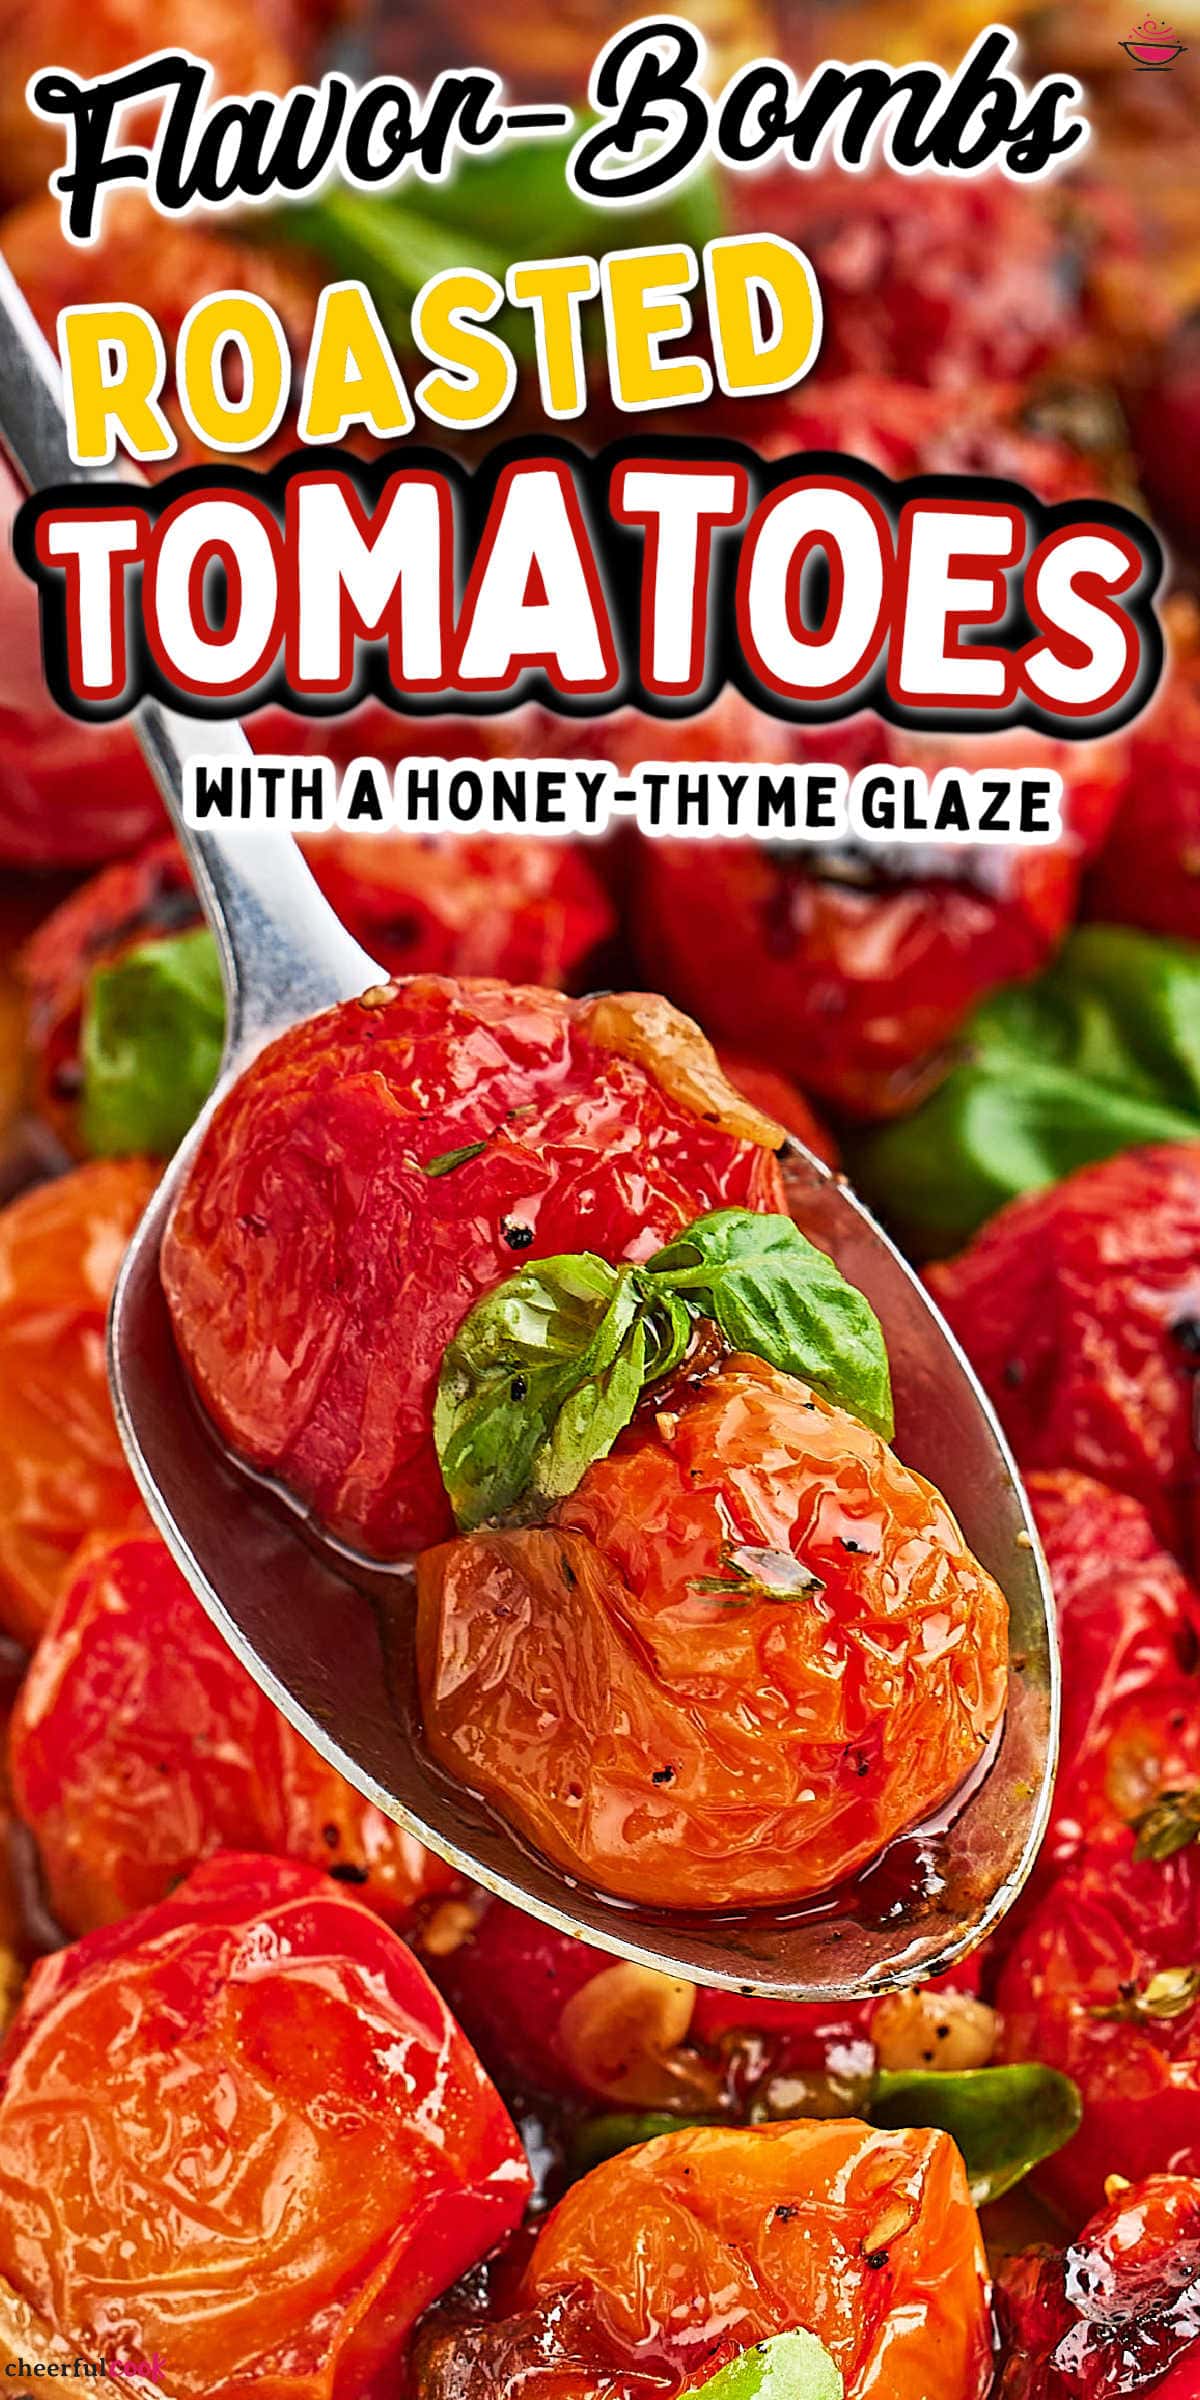 Looking for a tasty and simple recipe? Try our Roasted Cherry Tomatoes with Honey-Thyme Glaze - it's a perfect blend of sweet, savory, and a little bit of tang! #cheerfulcook #roastedcherrytomatoes #roastedvegetables #EasyRecipes #TomatoRecipes via @cheerfulcook